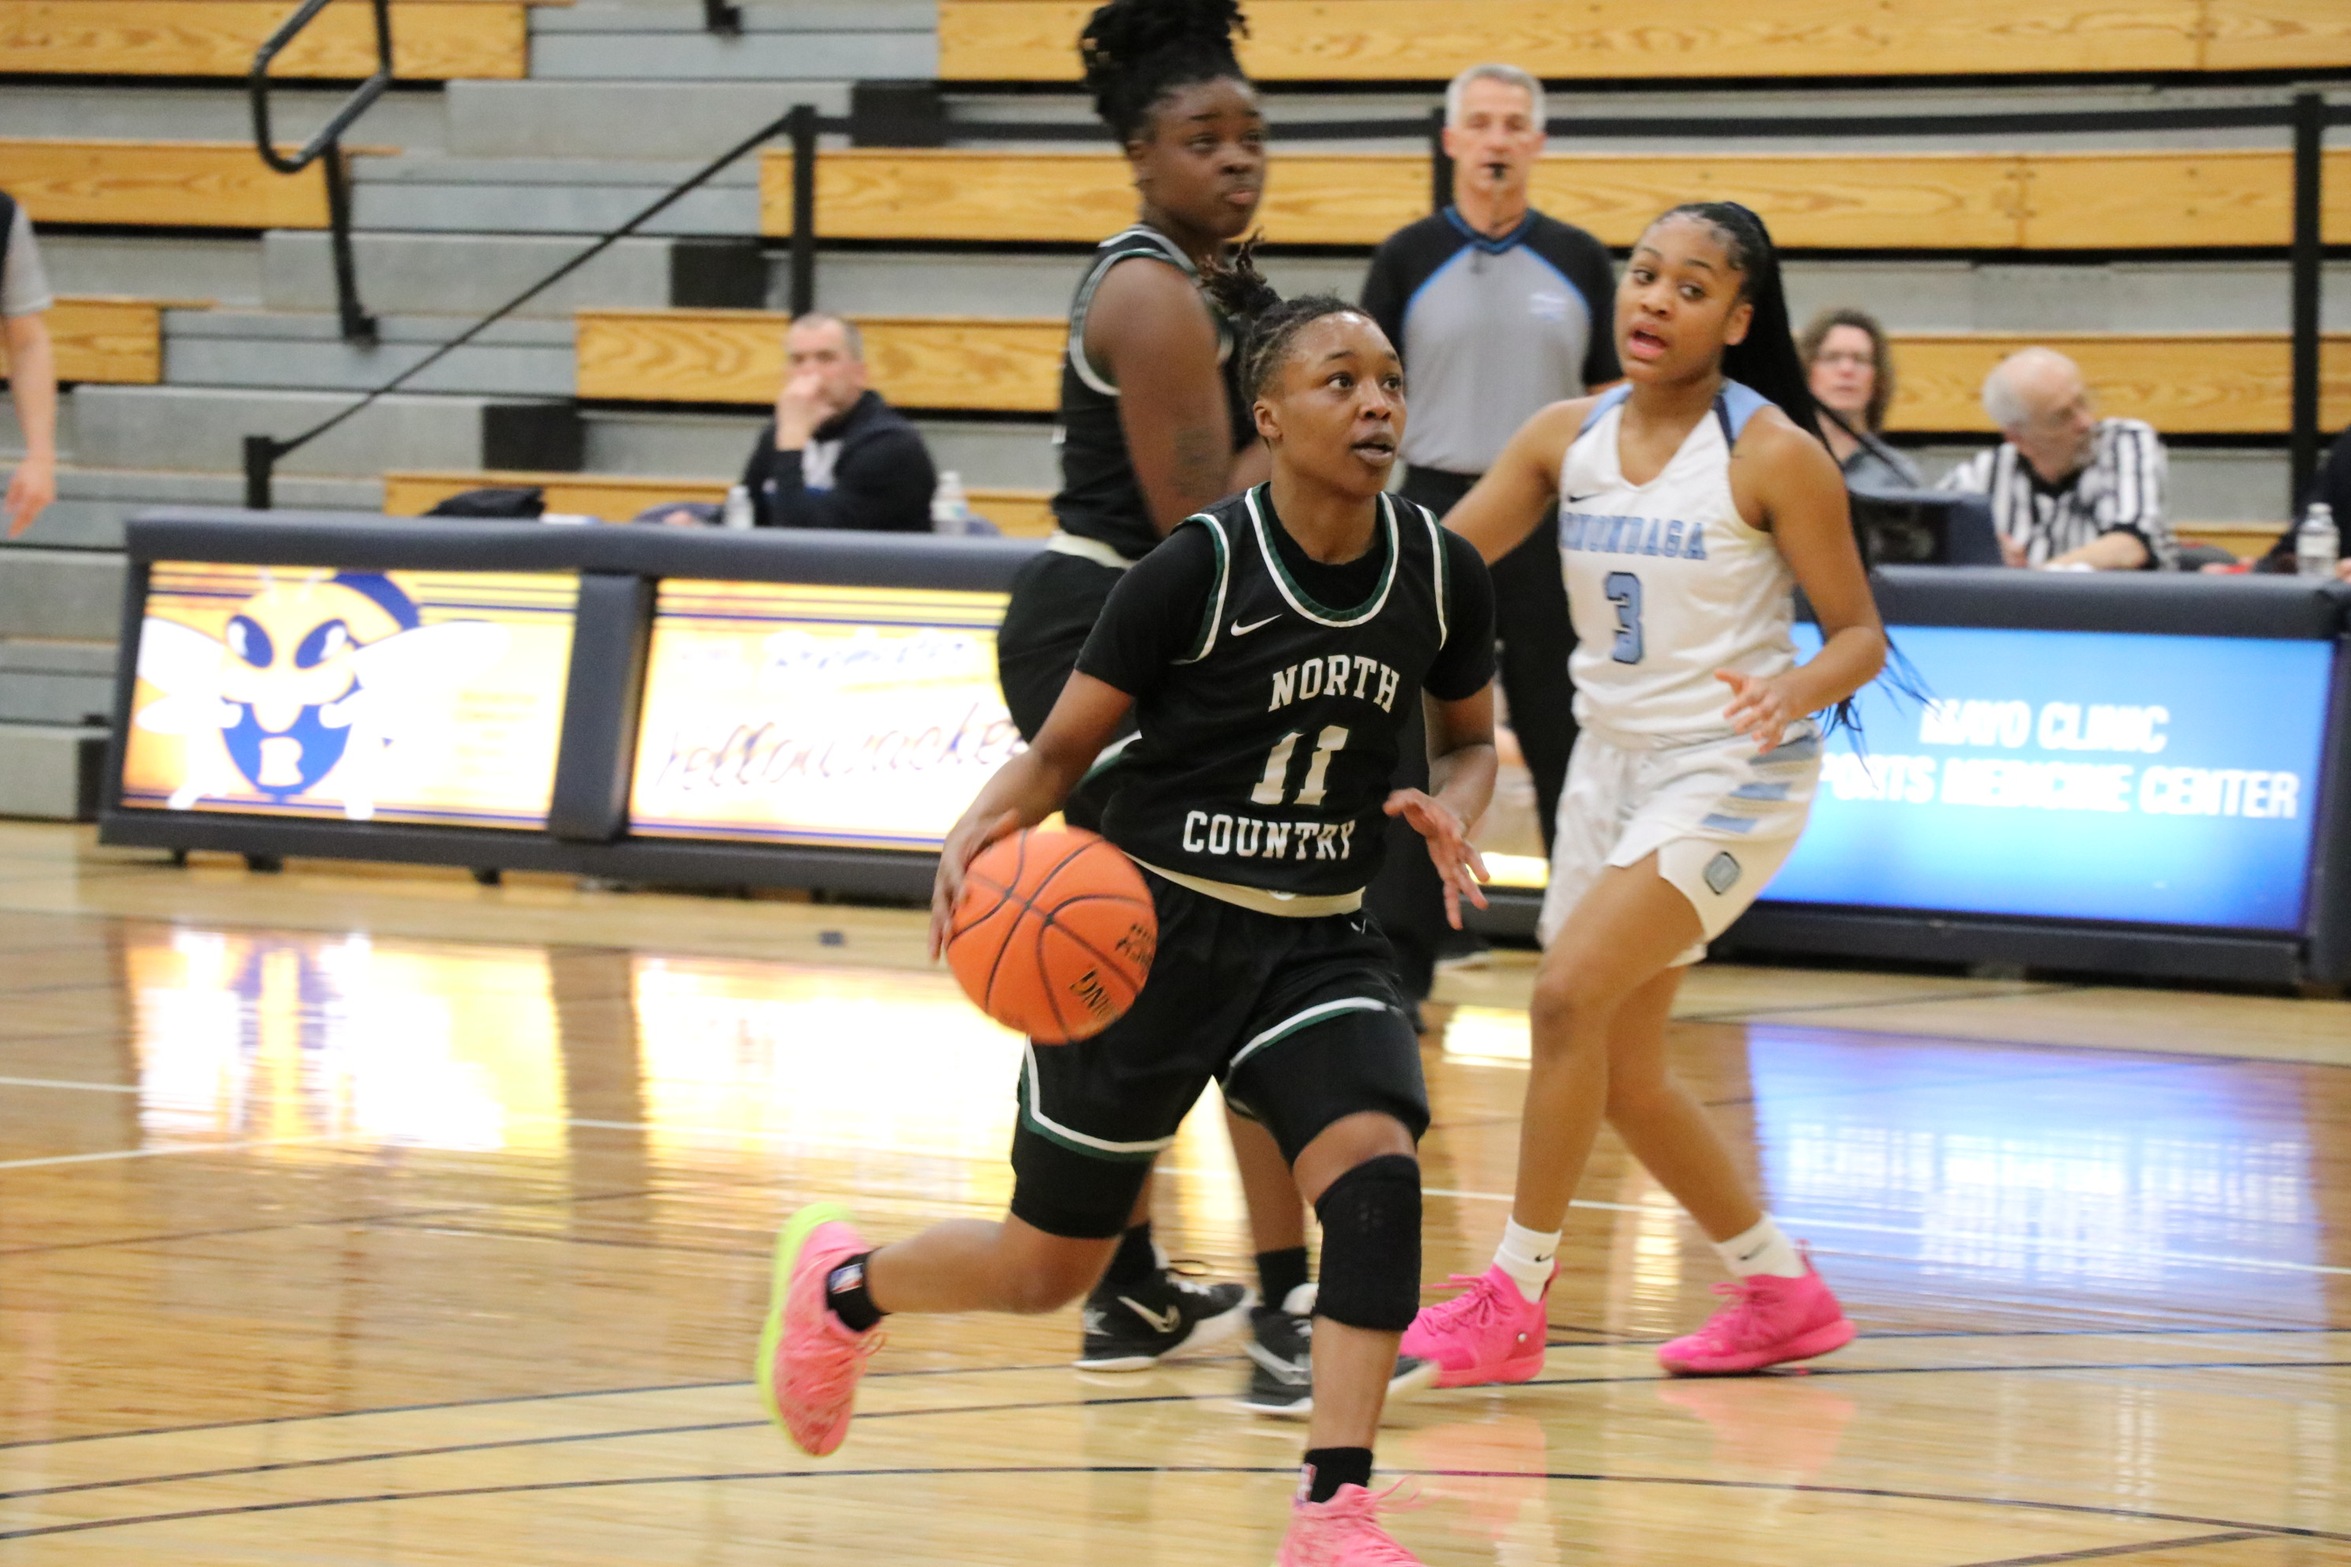 Lavender Ward brings the ball up the court for the Saints in their 69-64 victory over Onondaga Community College at the NJCAA Division III National Championships on Saturday, March 12. (Photo – NJCAA)